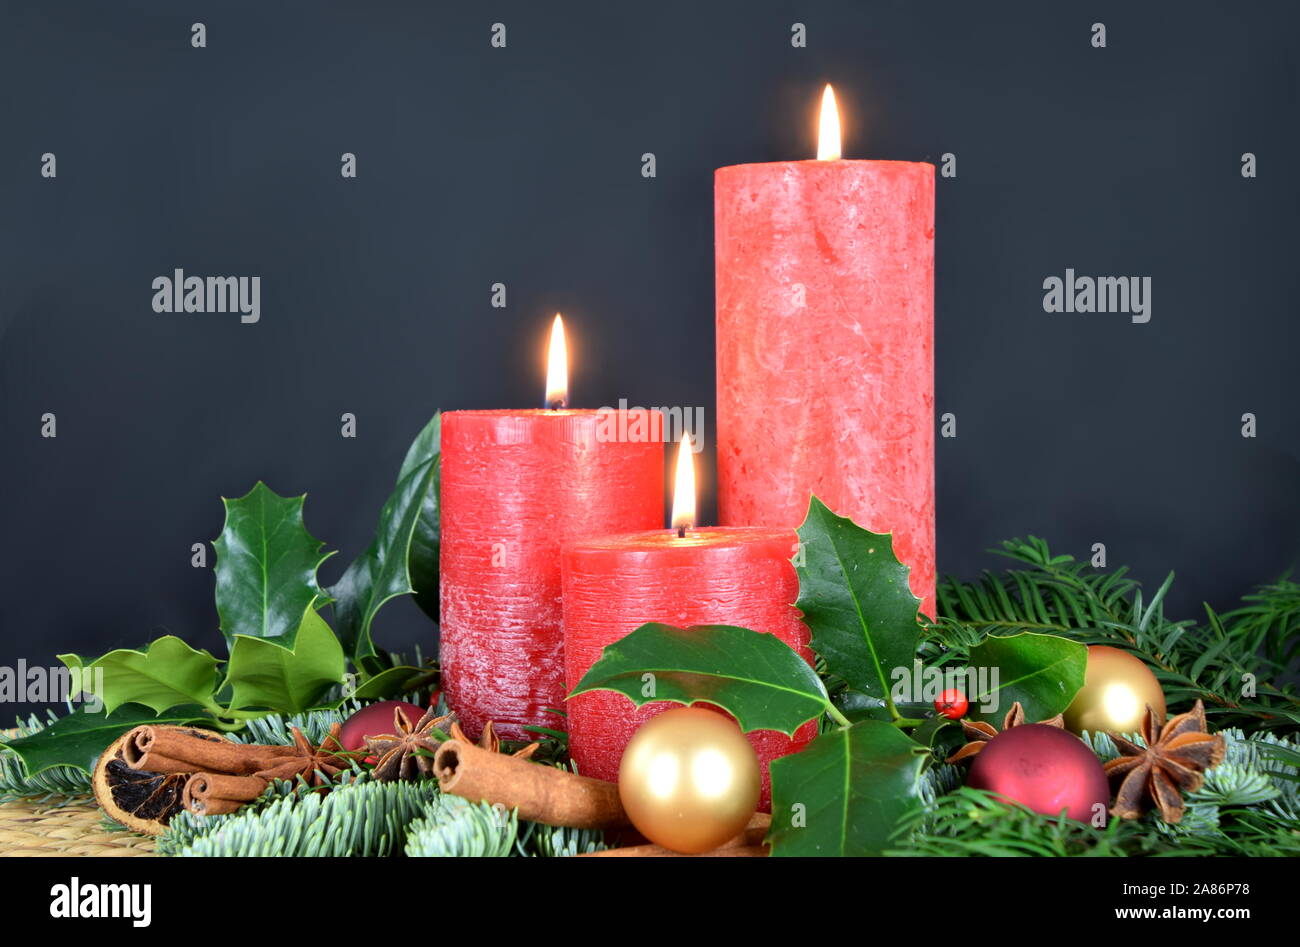 warm candlelight for advent and christmas Stock Photo